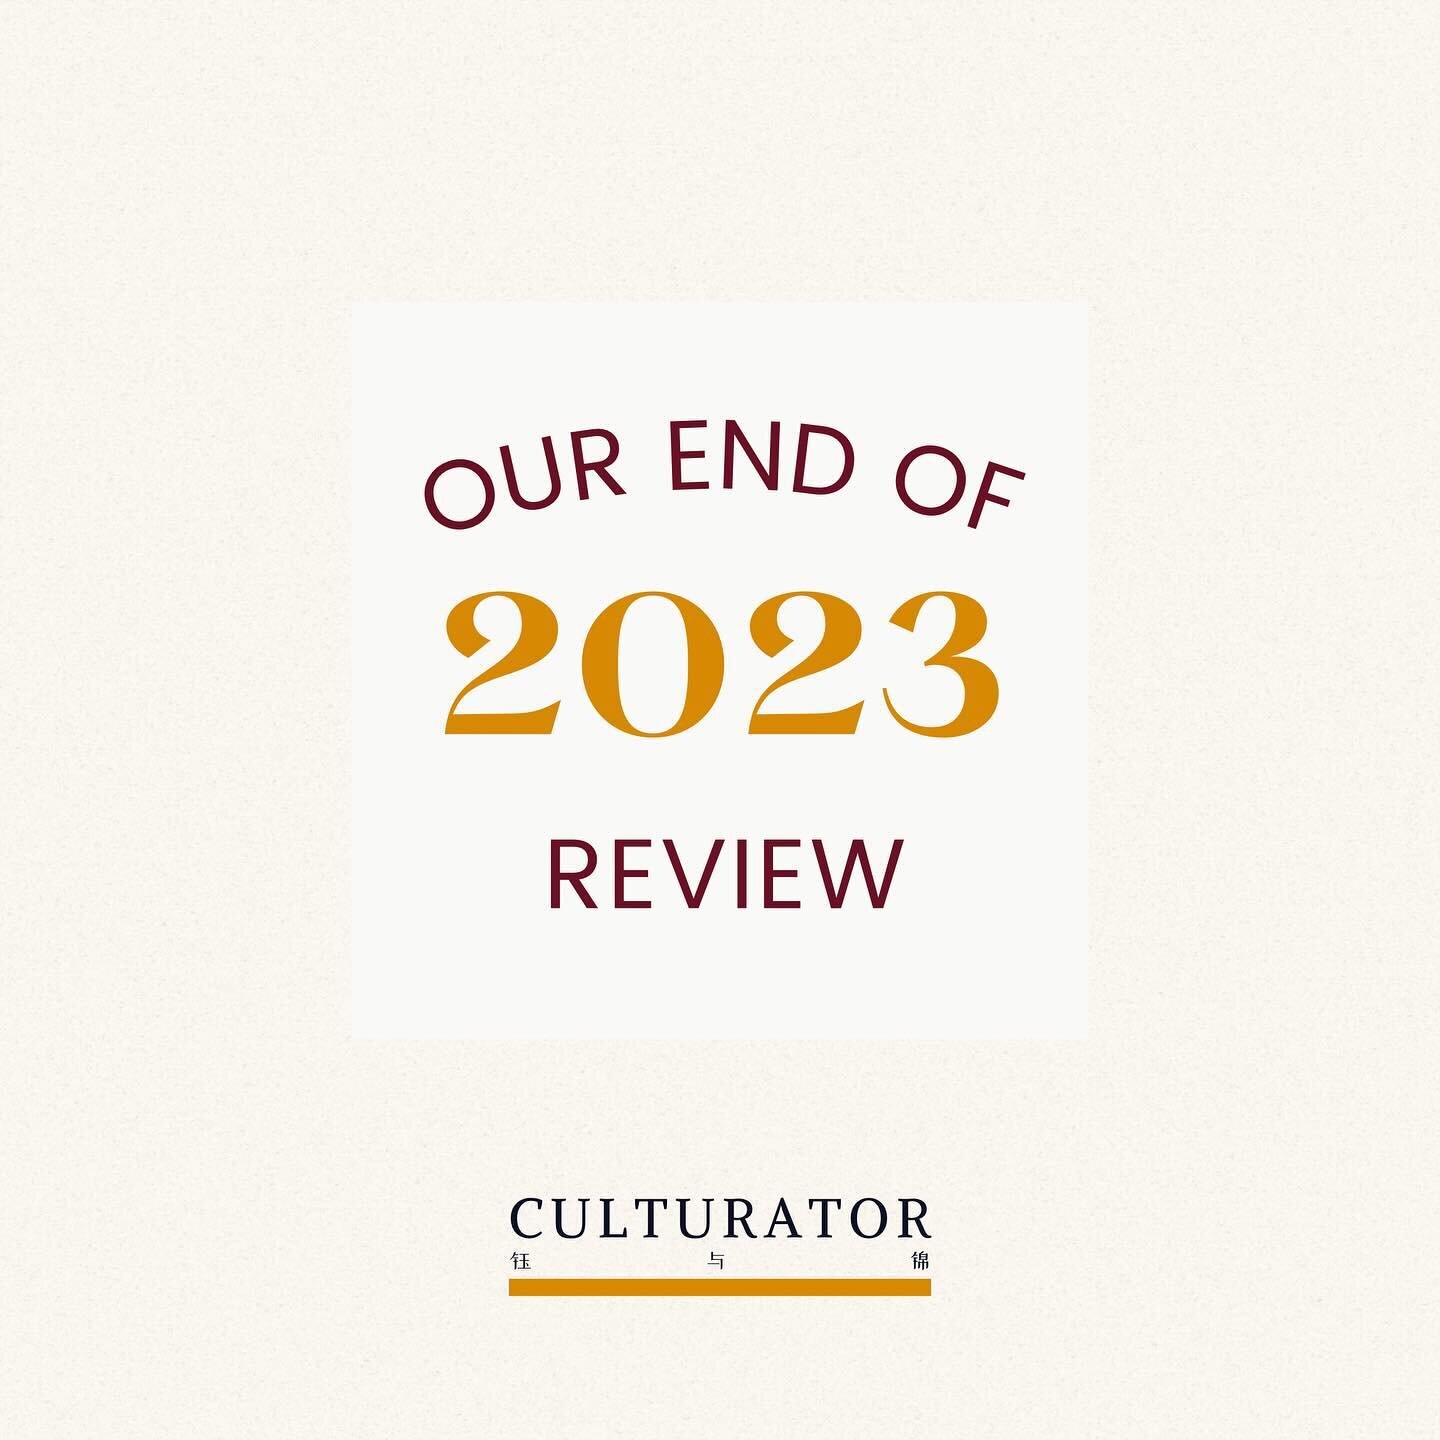 We want to thank everyone for a great first year with Culturator! With your love, support, and enthusiasm, we have grown so much! 💛 We can&rsquo;t wait to see what&rsquo;s in store for us in 2024! 
.
.
.
#CulturatorCraftsChange #2024 #EndoftheYearRe